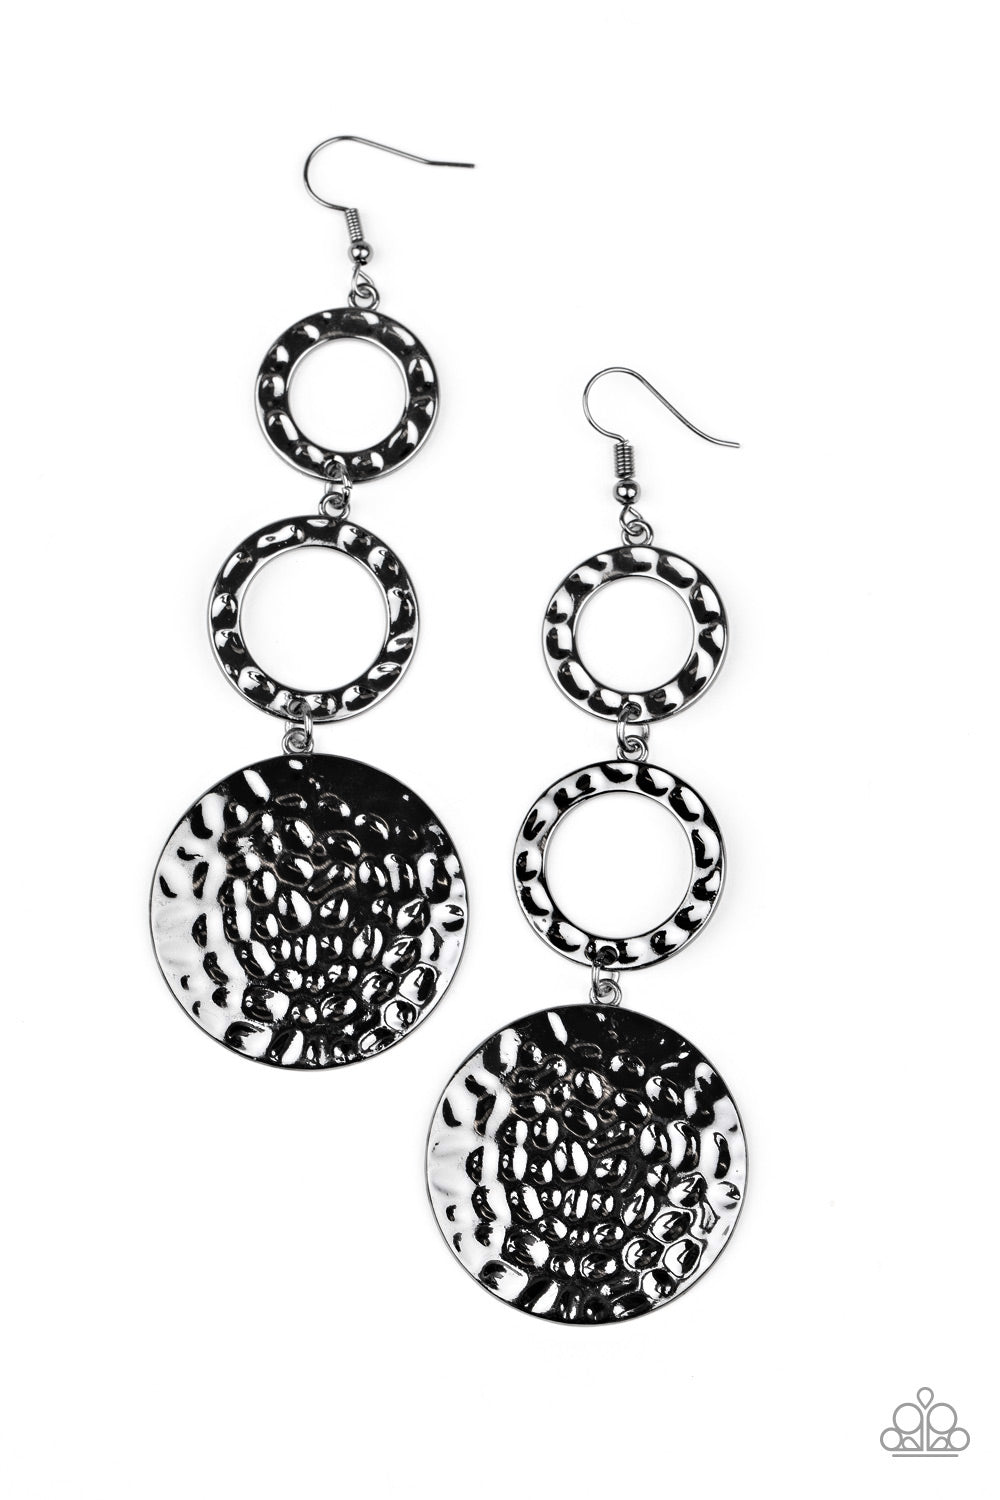 Paparazzi Blooming Baubles - Black Earrings - A Finishing Touch 